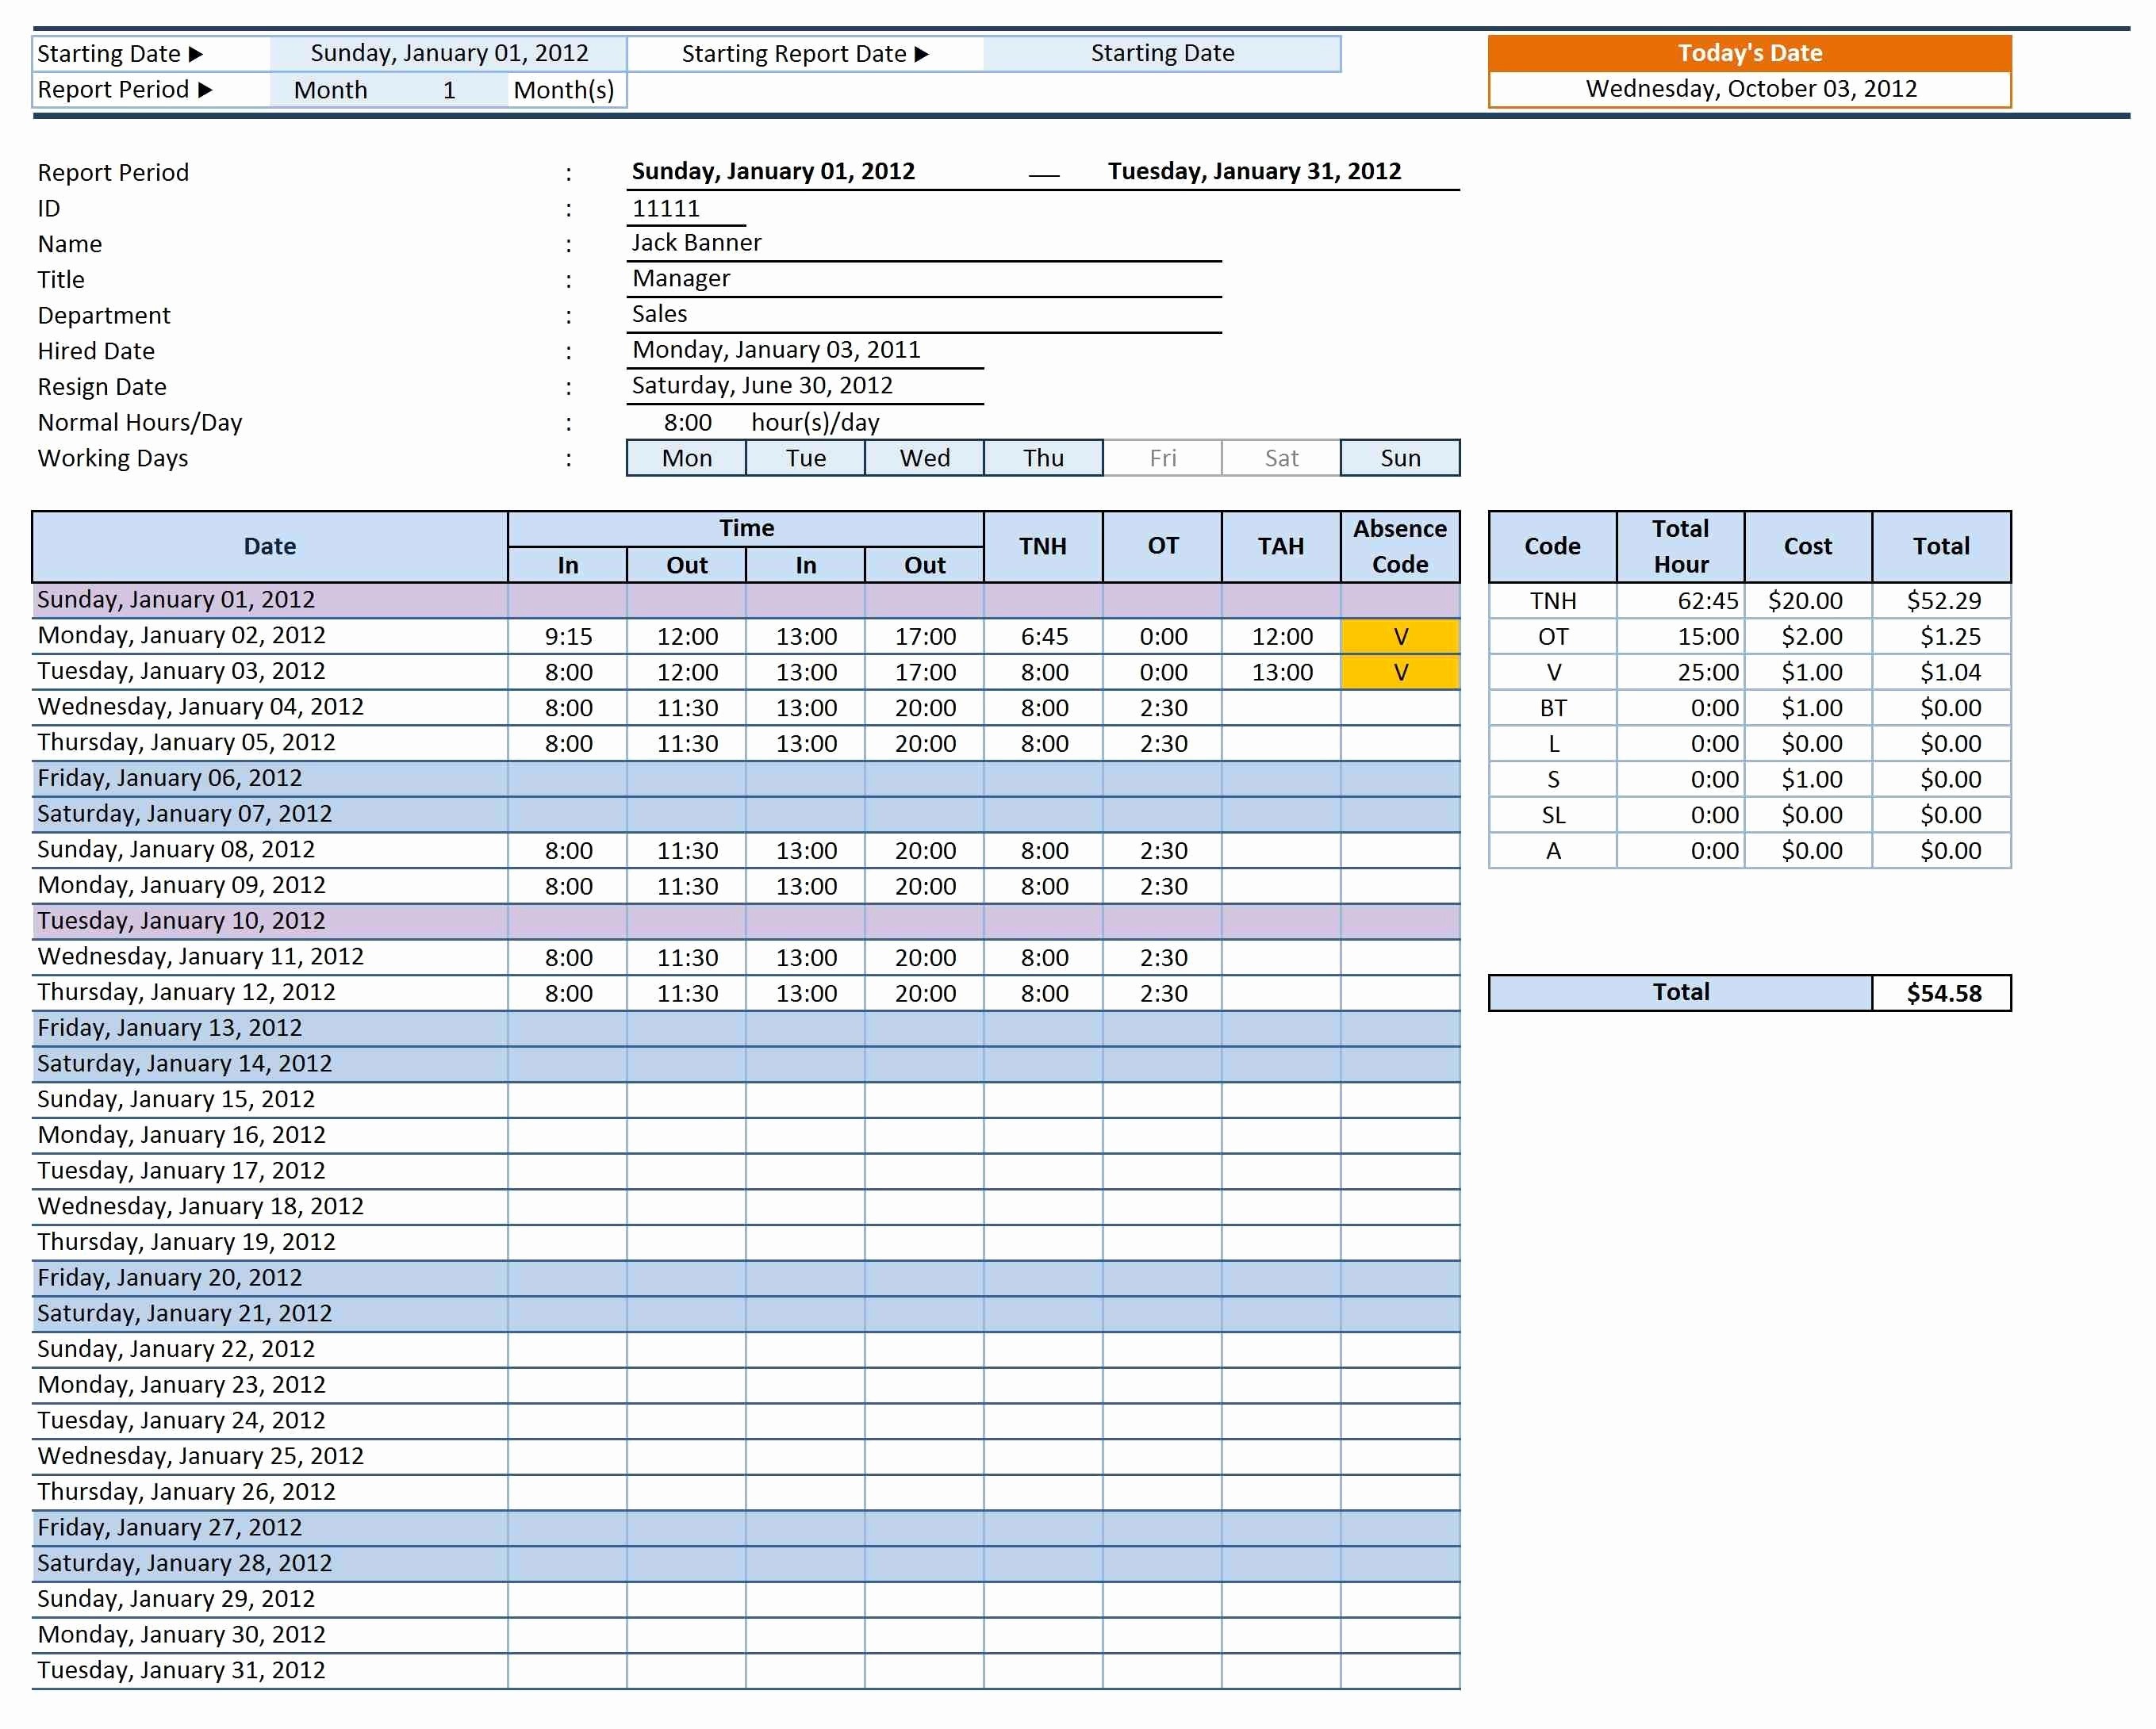 Fmla Rolling Calendar Tracking Spreadsheet Awesome Document